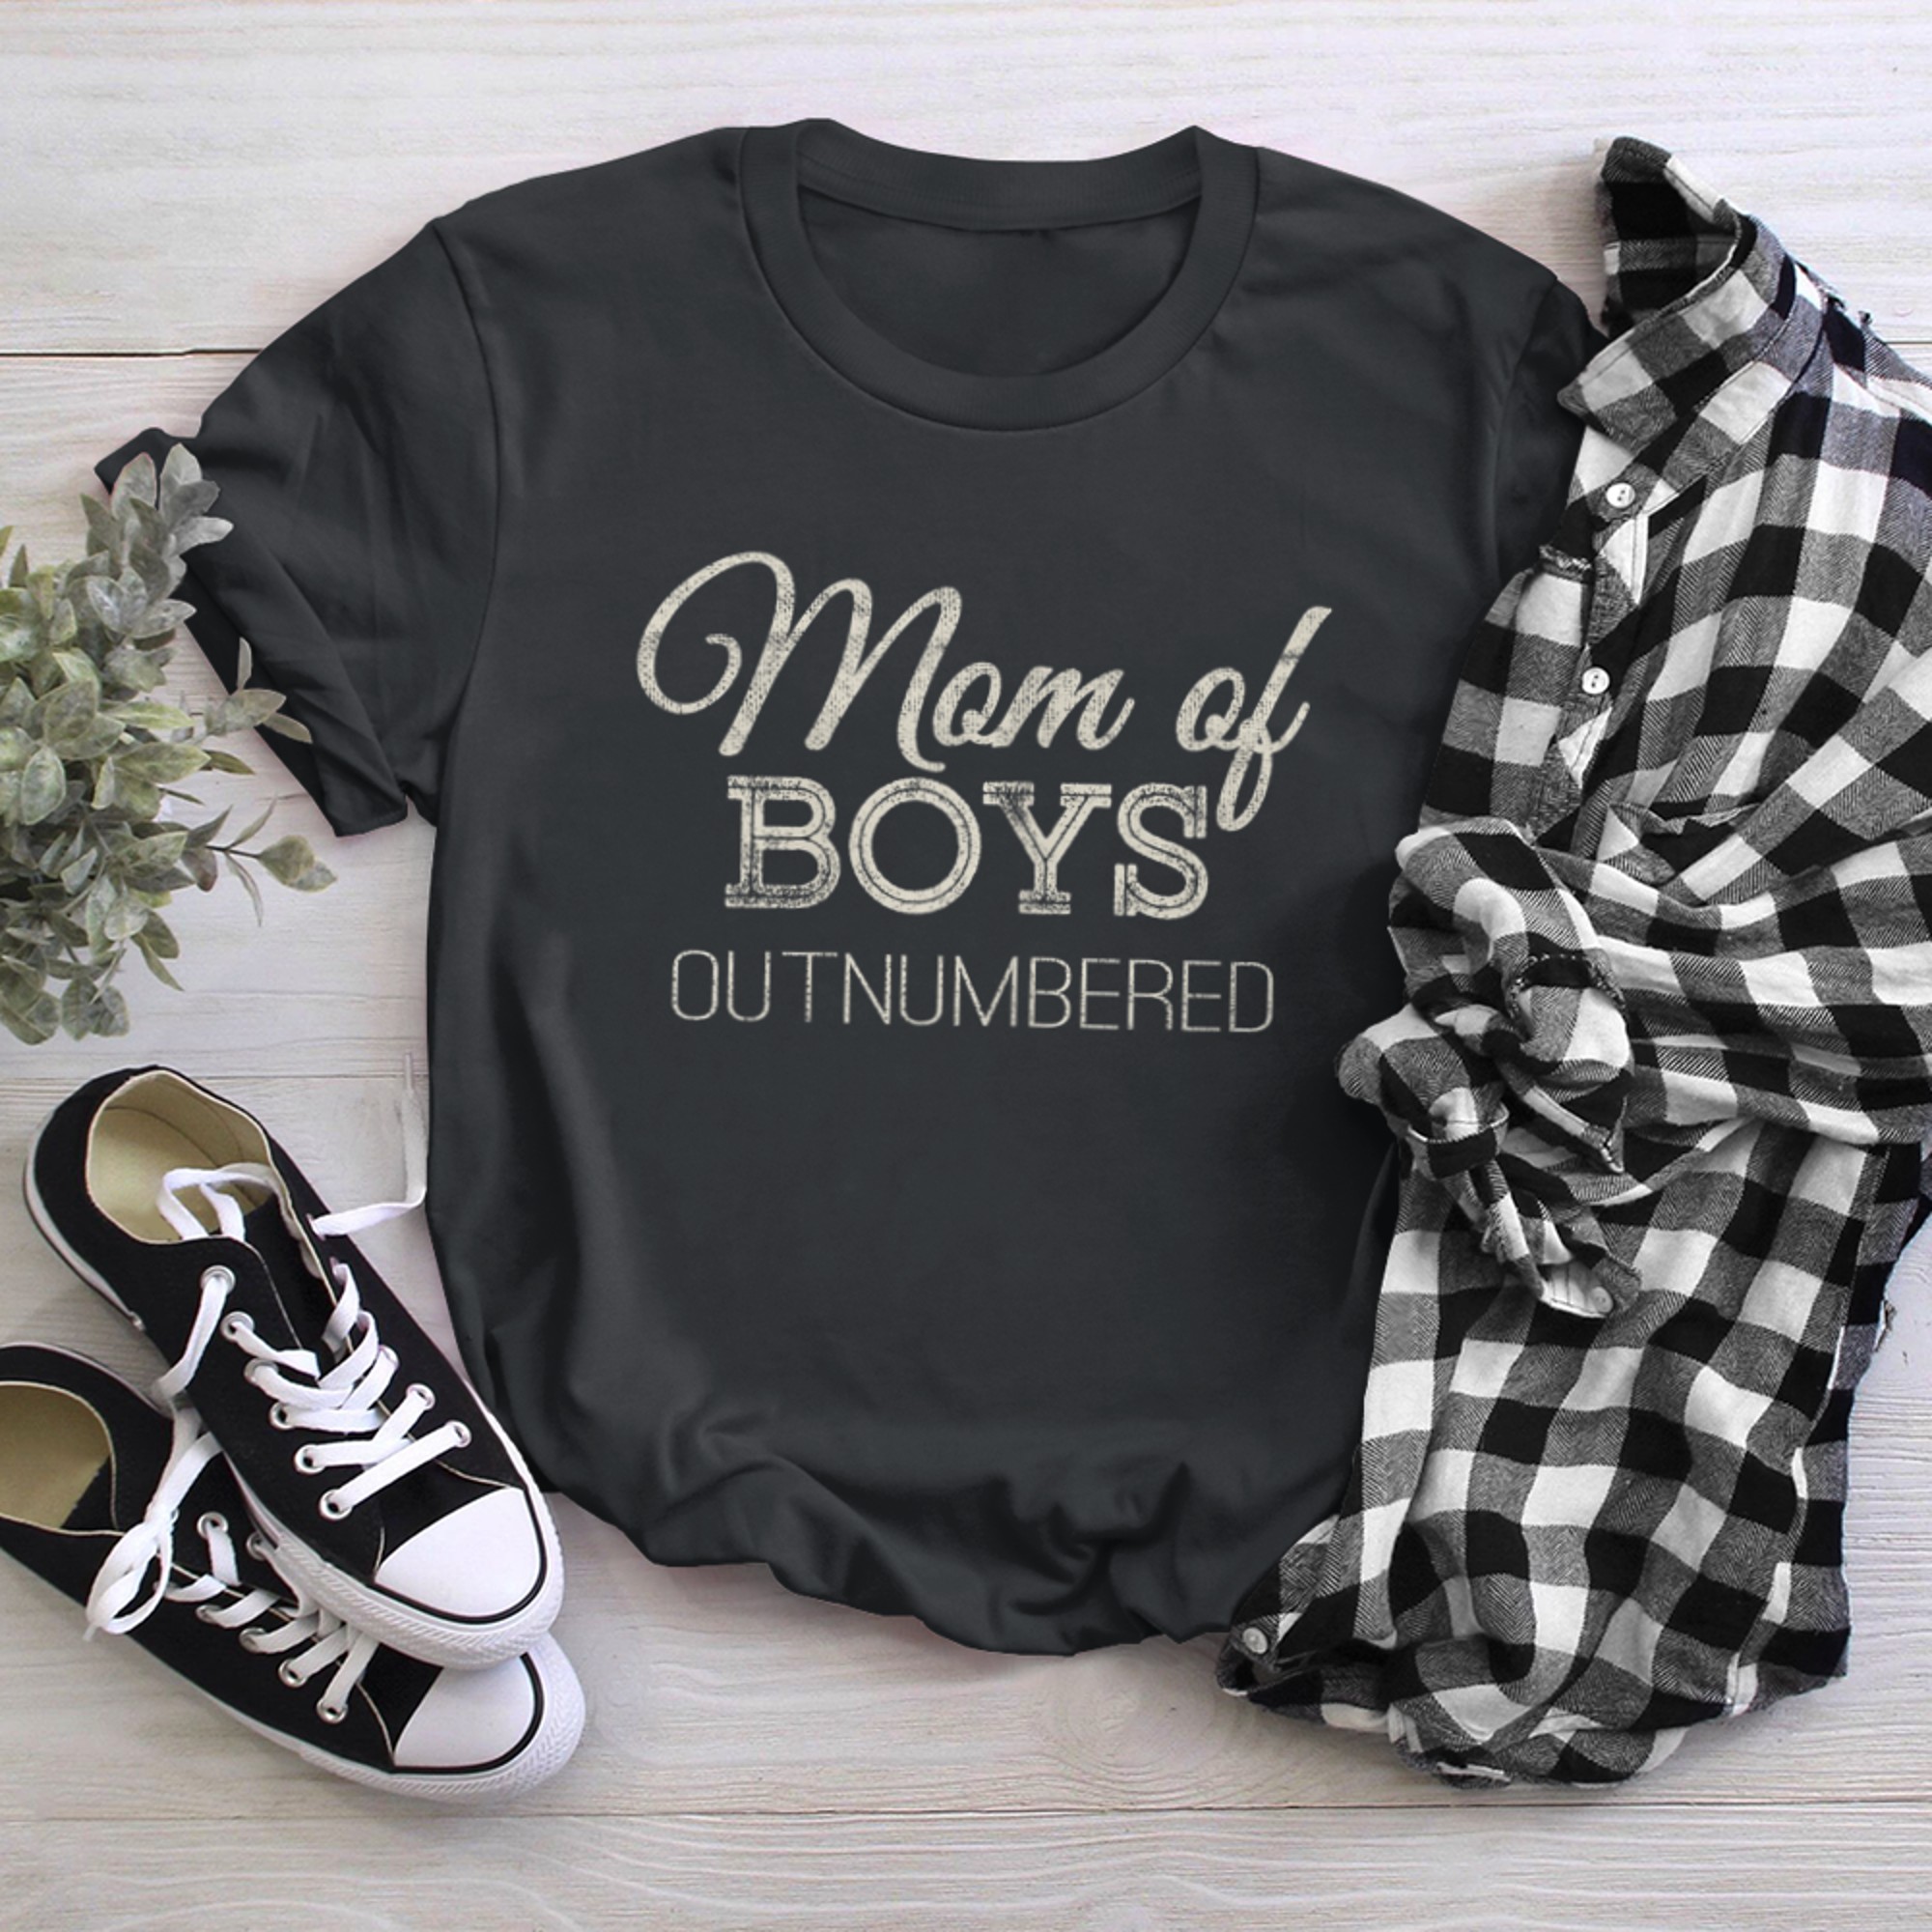 Mom of Outnumbered t-shirt black